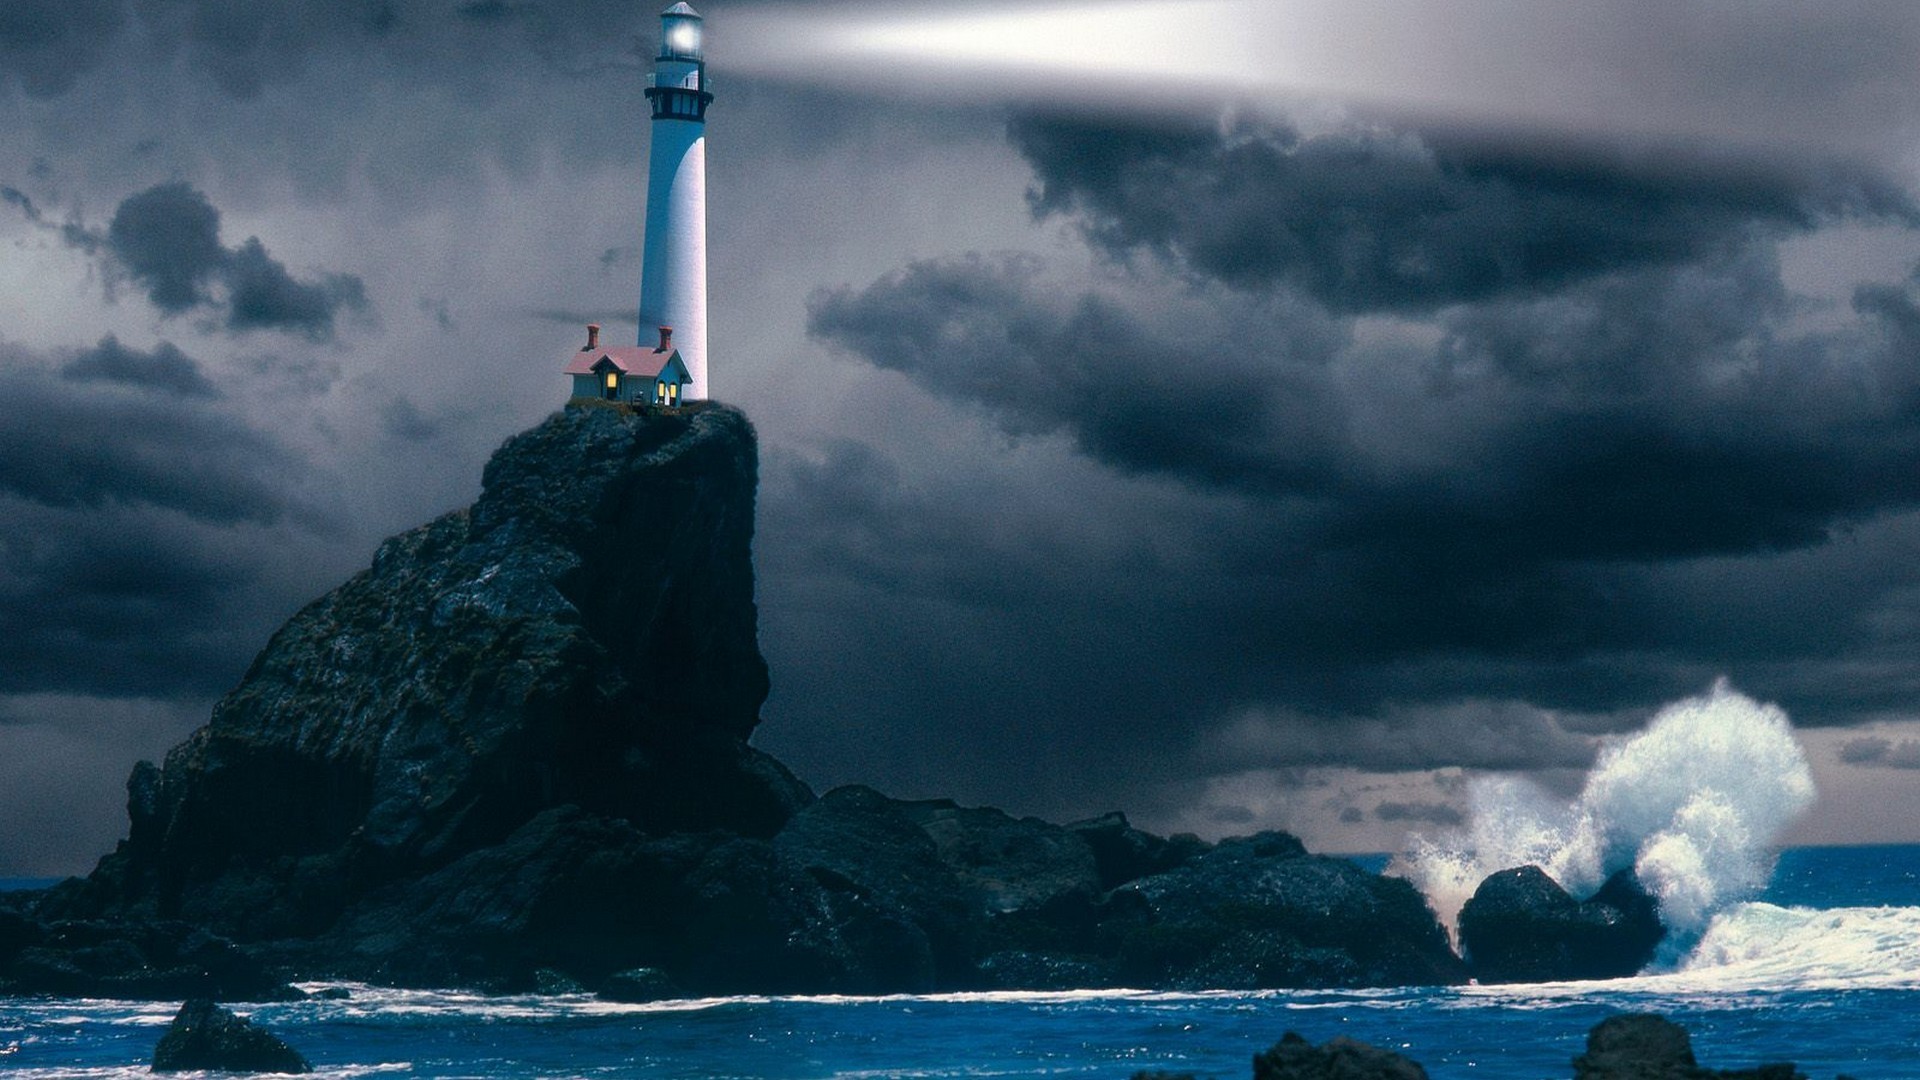 Lighthouse Storm Wallpapers Mobile On Wallpaper 1080p - Lighthouse Guiding A Ship - HD Wallpaper 